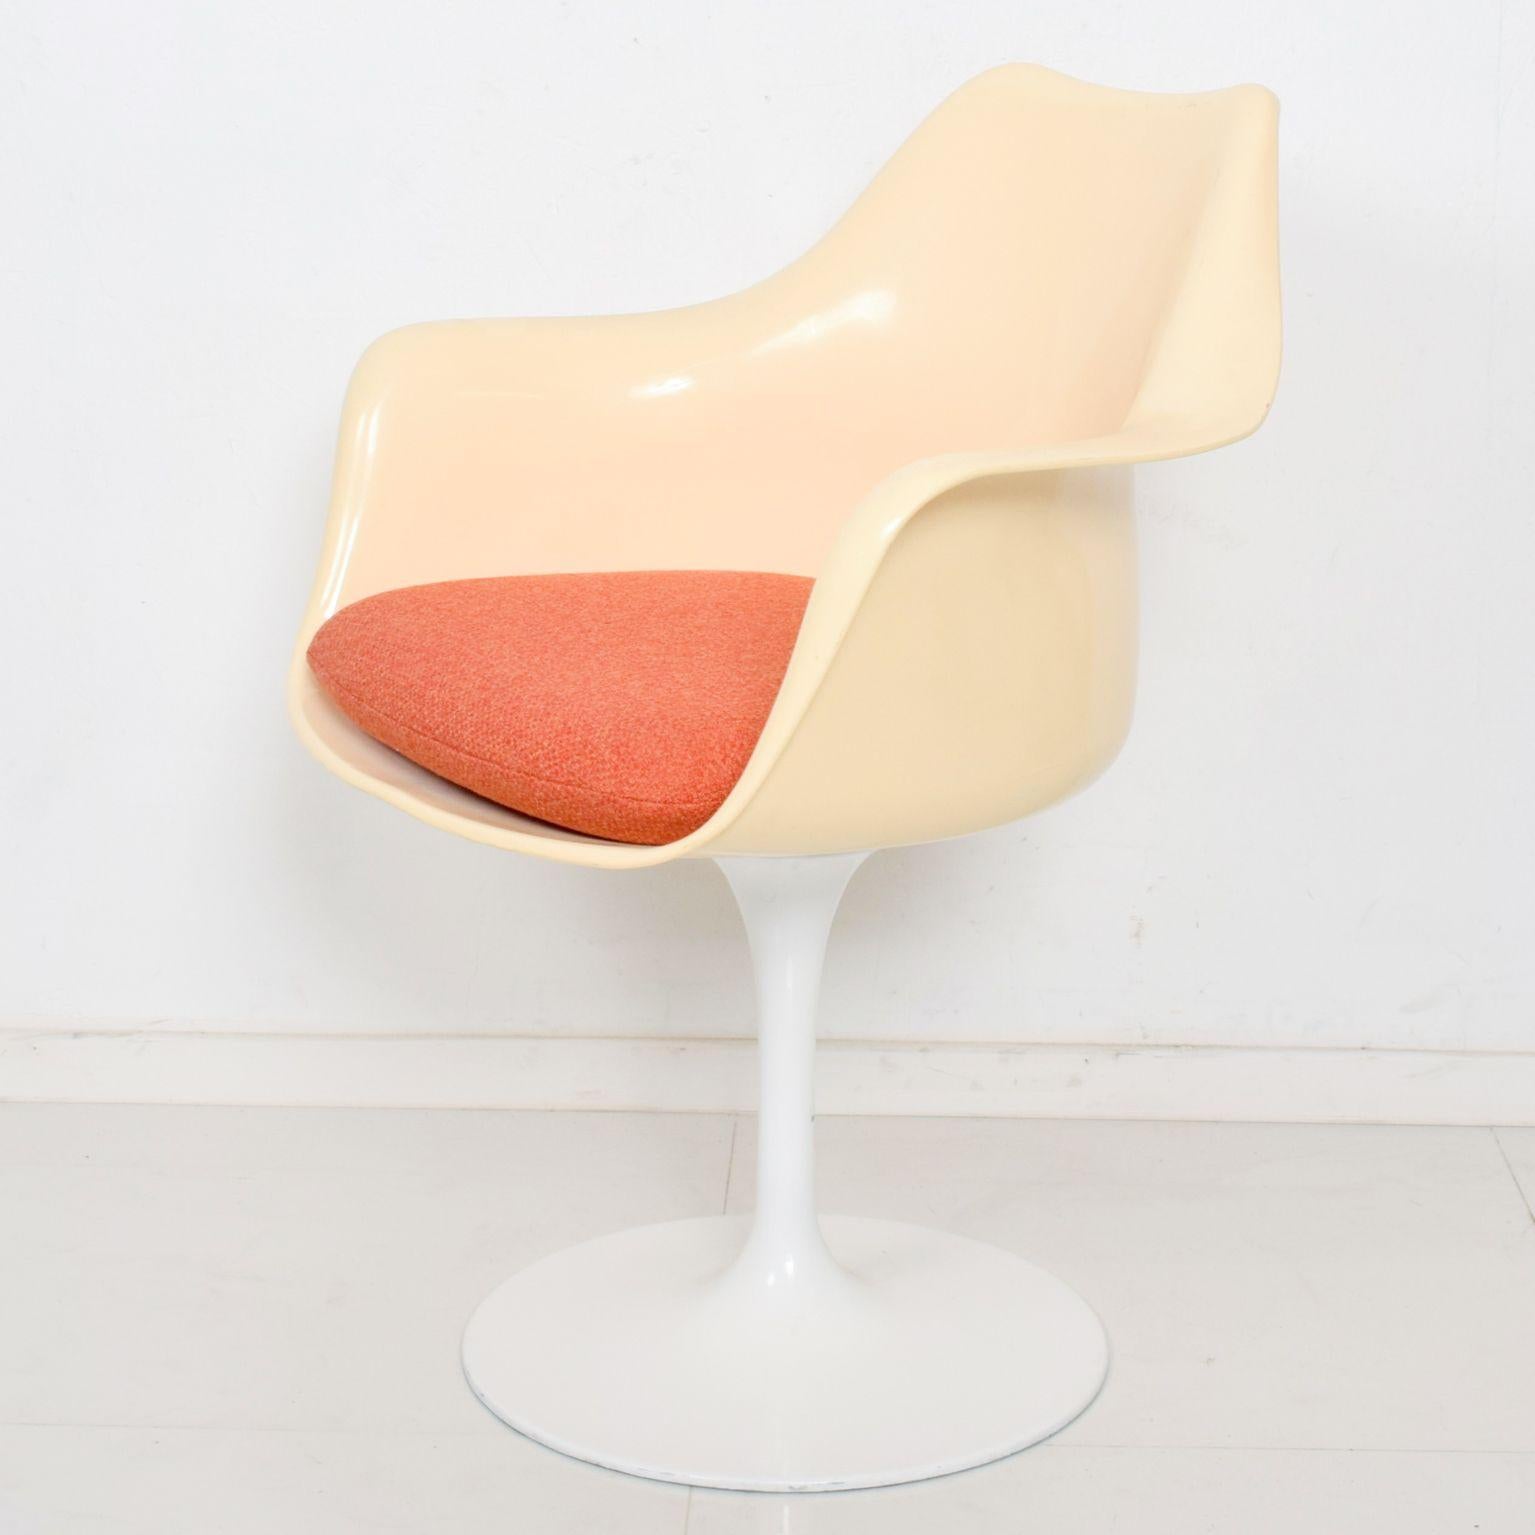 Offering you:  a Set of Four Vintage Tulip Dining Arm Chairs by Eero Saarinen for KNOLL. Featuring new cushions with eye catching orange upholstery.

No label is present. Mid Century Modern classic  modernist design.

Dimensions:  33